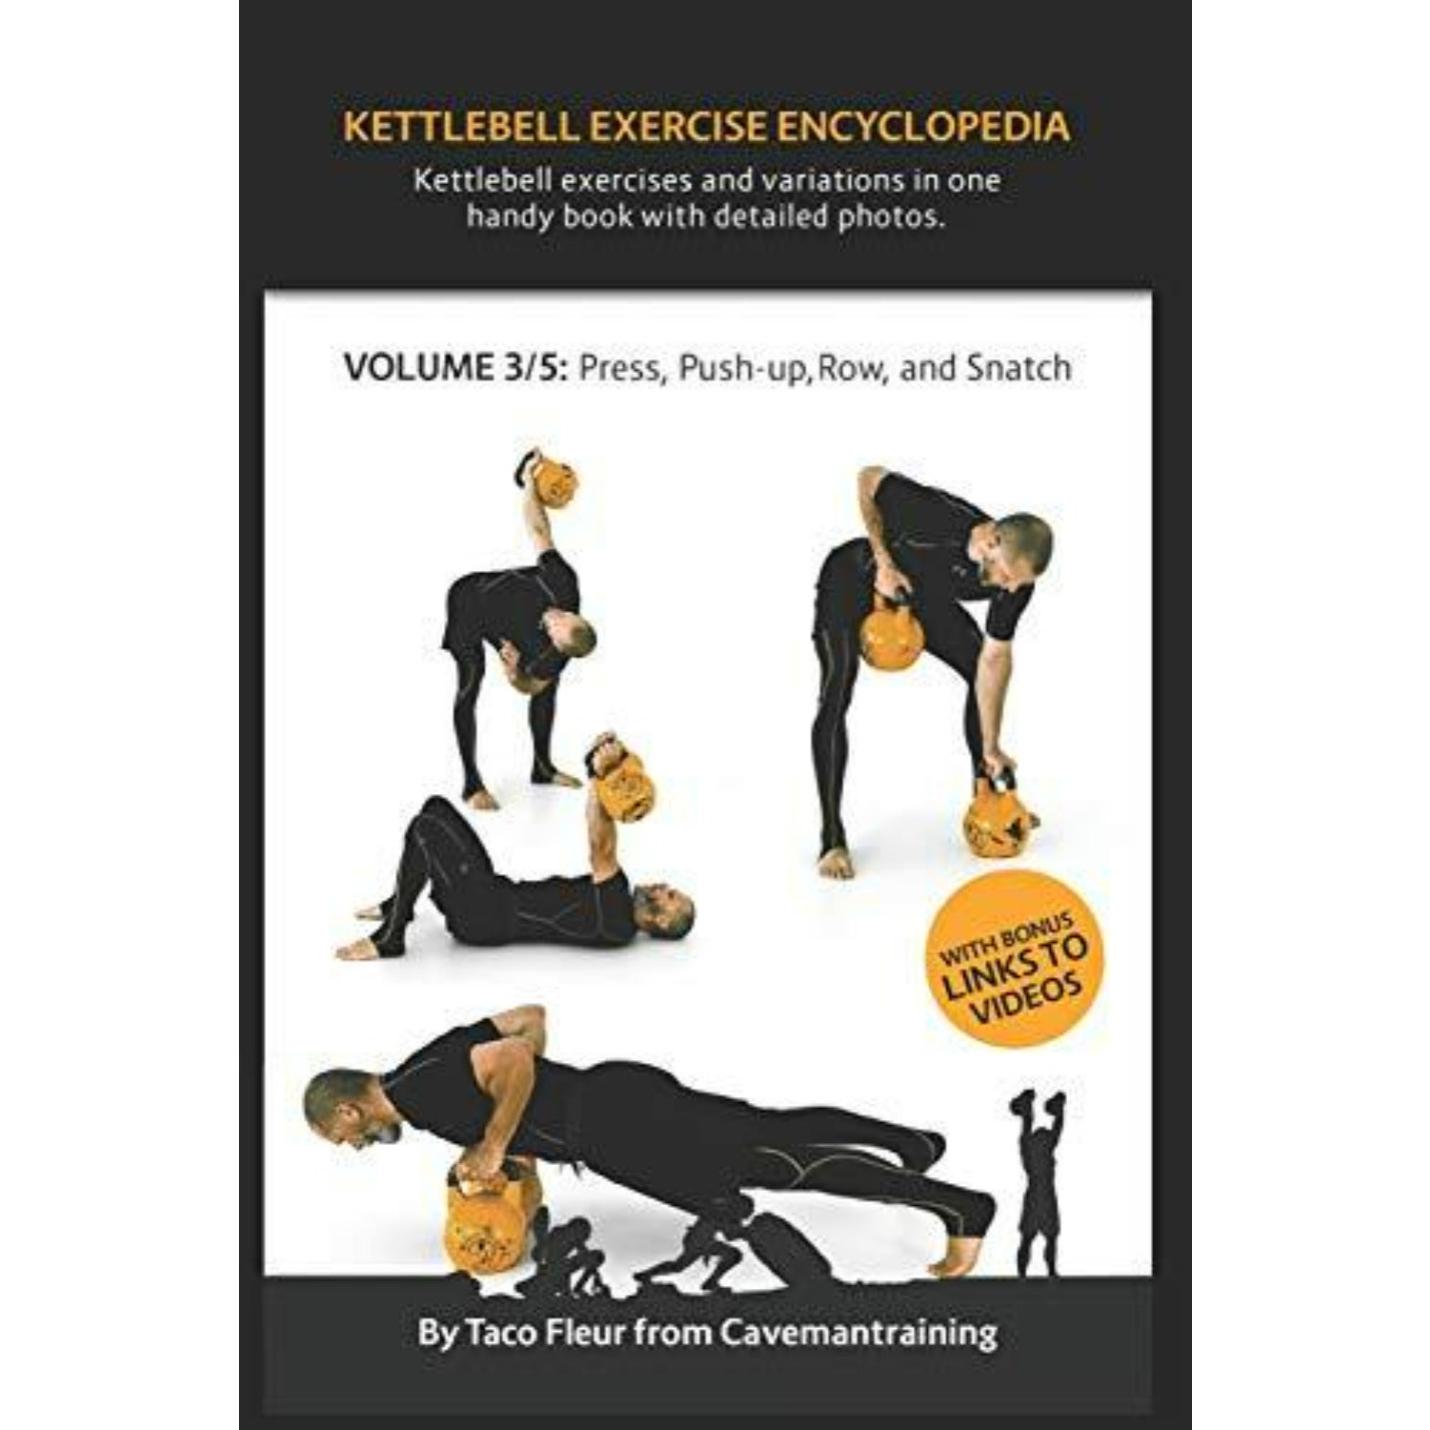 Kettlebell Exercise Encyclopedia VOL. 3: Kettlebell press, push-up, row, and snatch exercise variations - kettlebell oefeningen - happygetfit.com